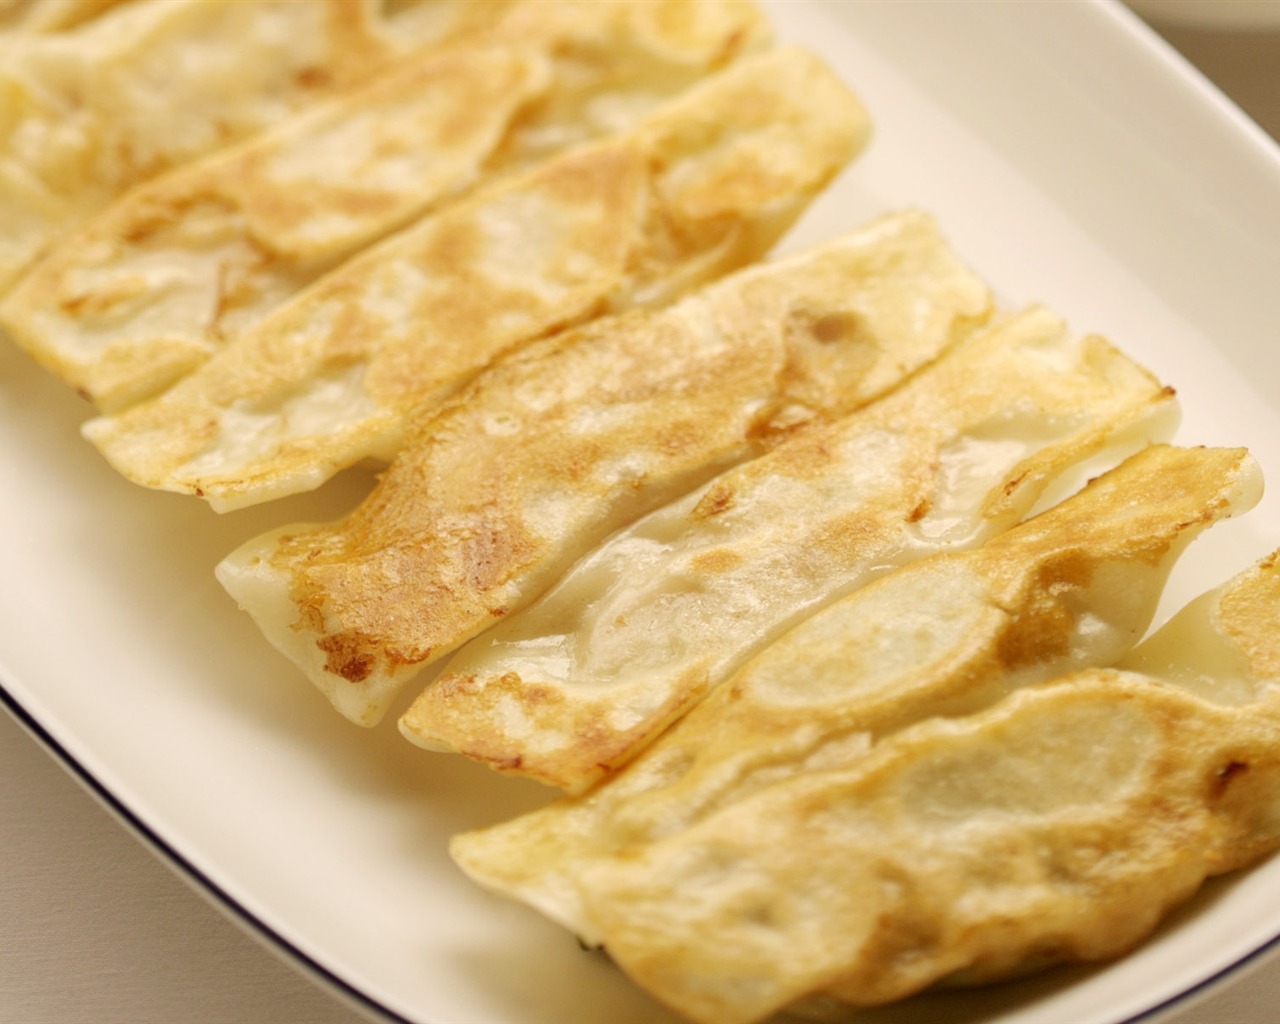 Chinese snacks pastry wallpaper (2) #15 - 1280x1024